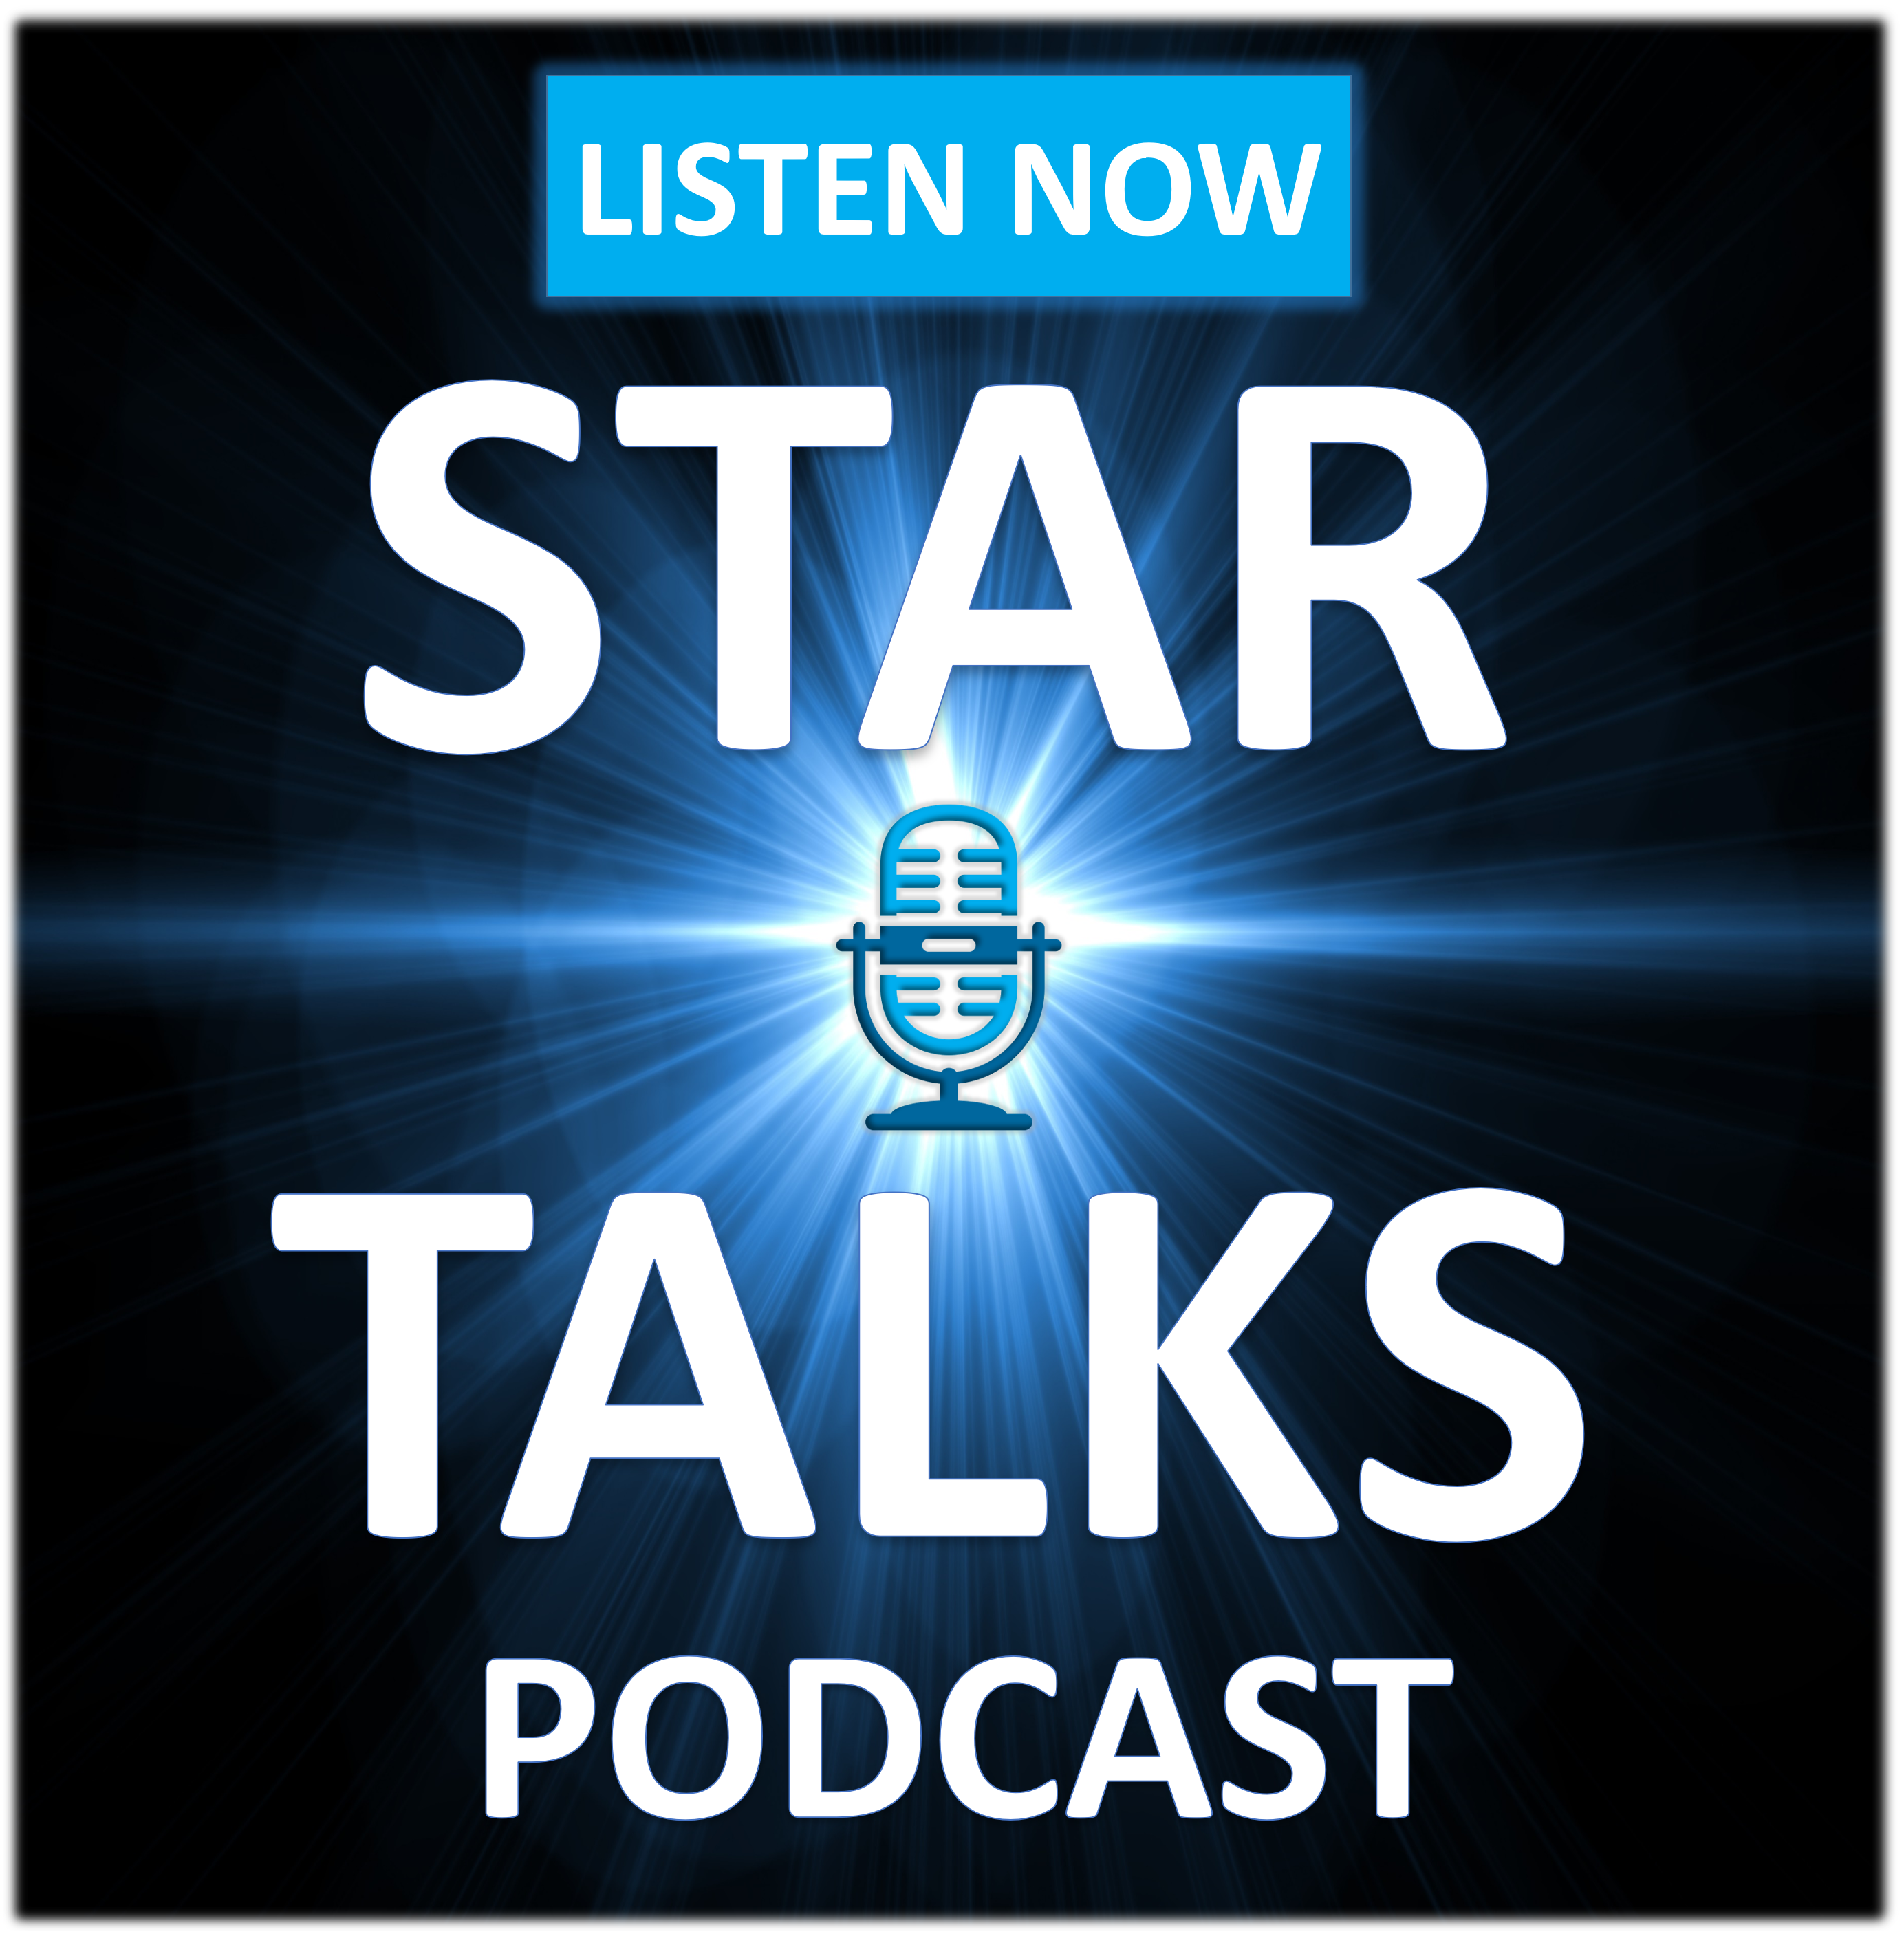 Listen to Star Talks, the podcast produced by Stellar One Consulting